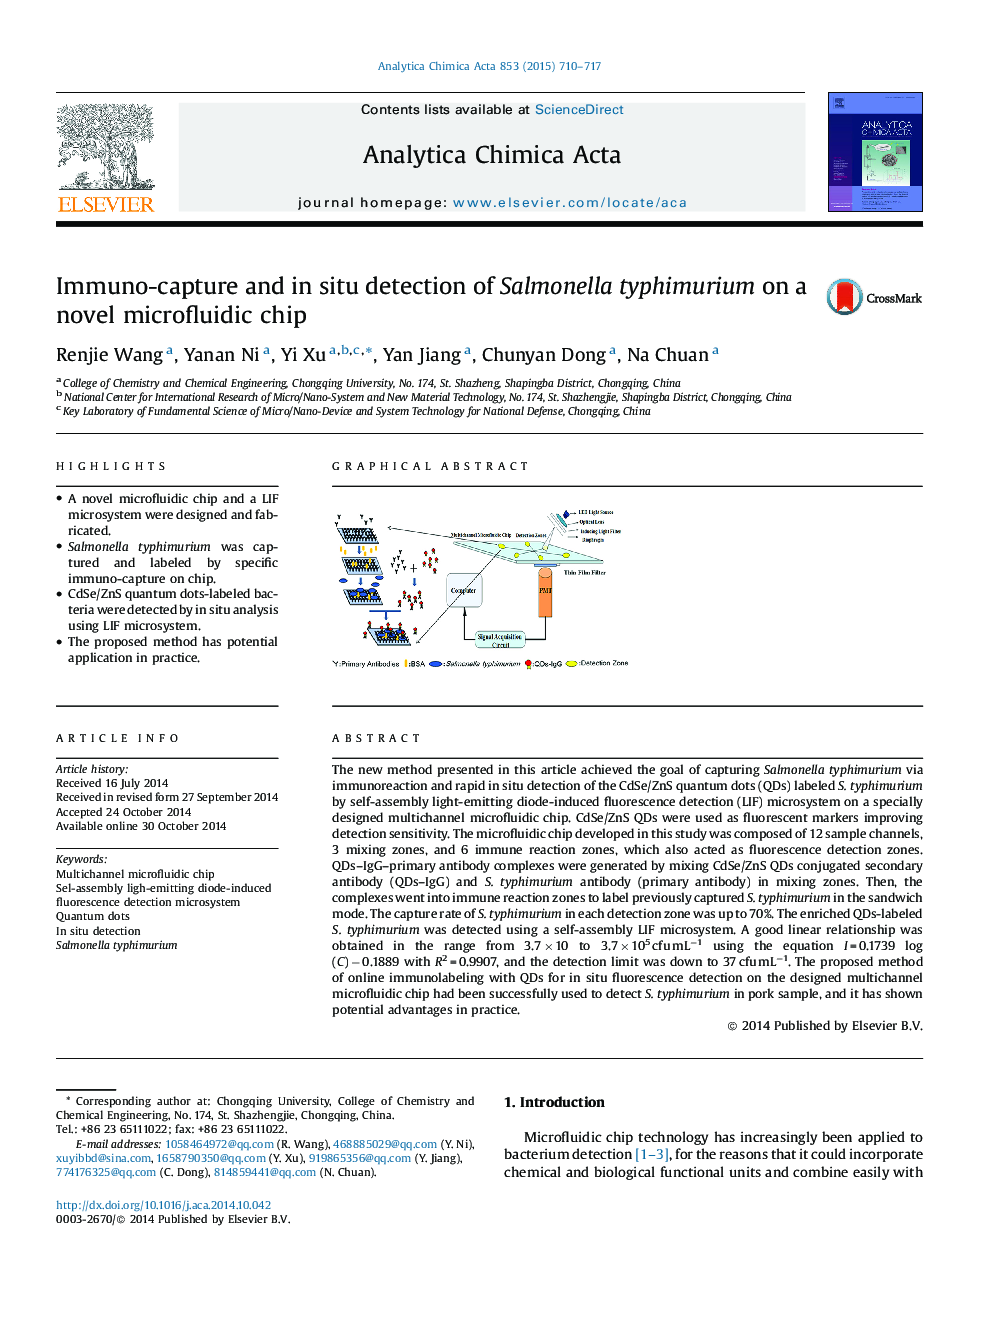 Immuno-capture and in situ detection of Salmonella typhimurium on a novel microfluidic chip